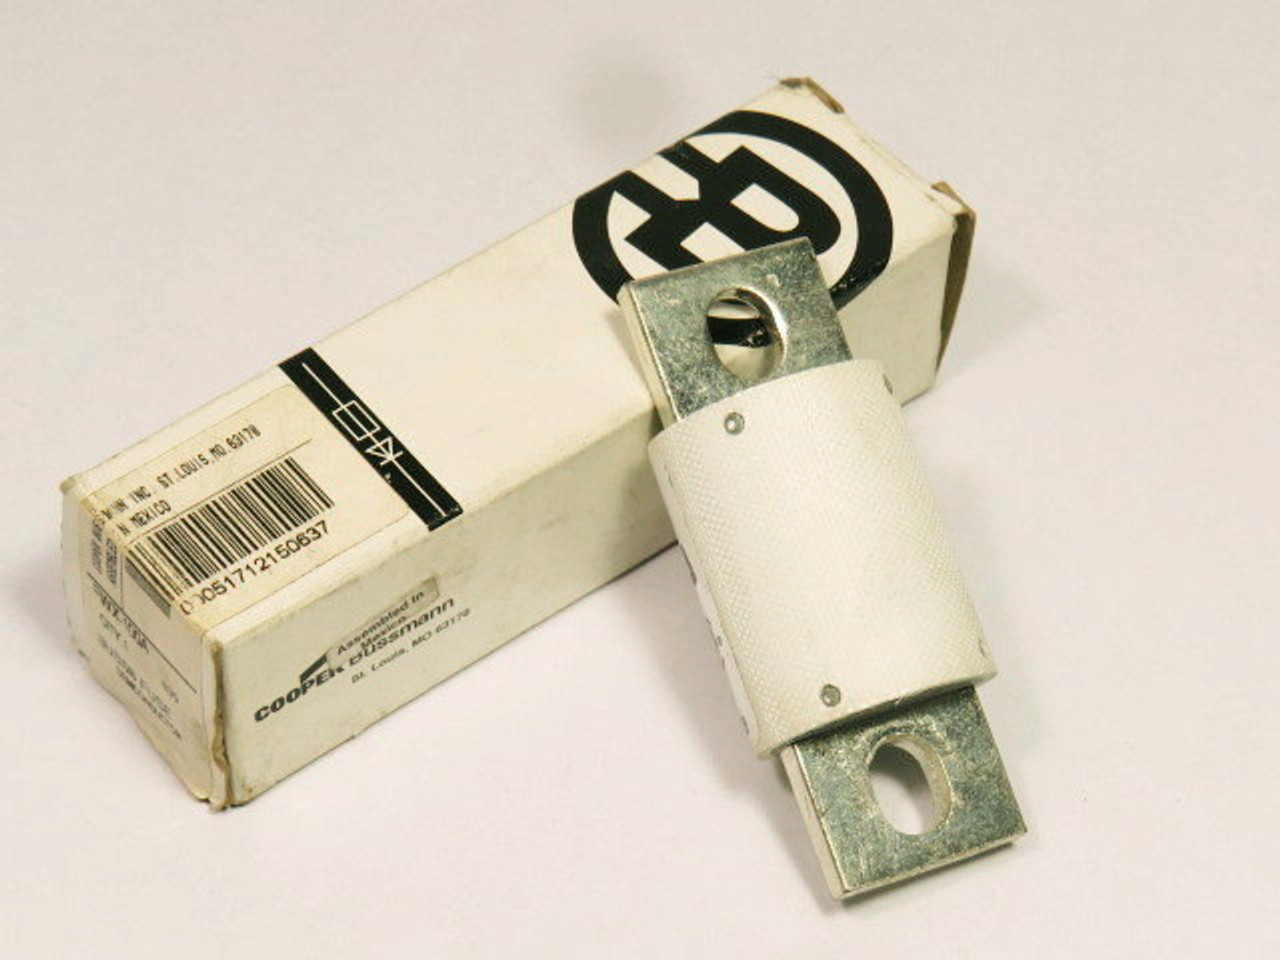 Bussmann FWX-100A Fast Acting Blade Fuse 100A 250V ! NEW !